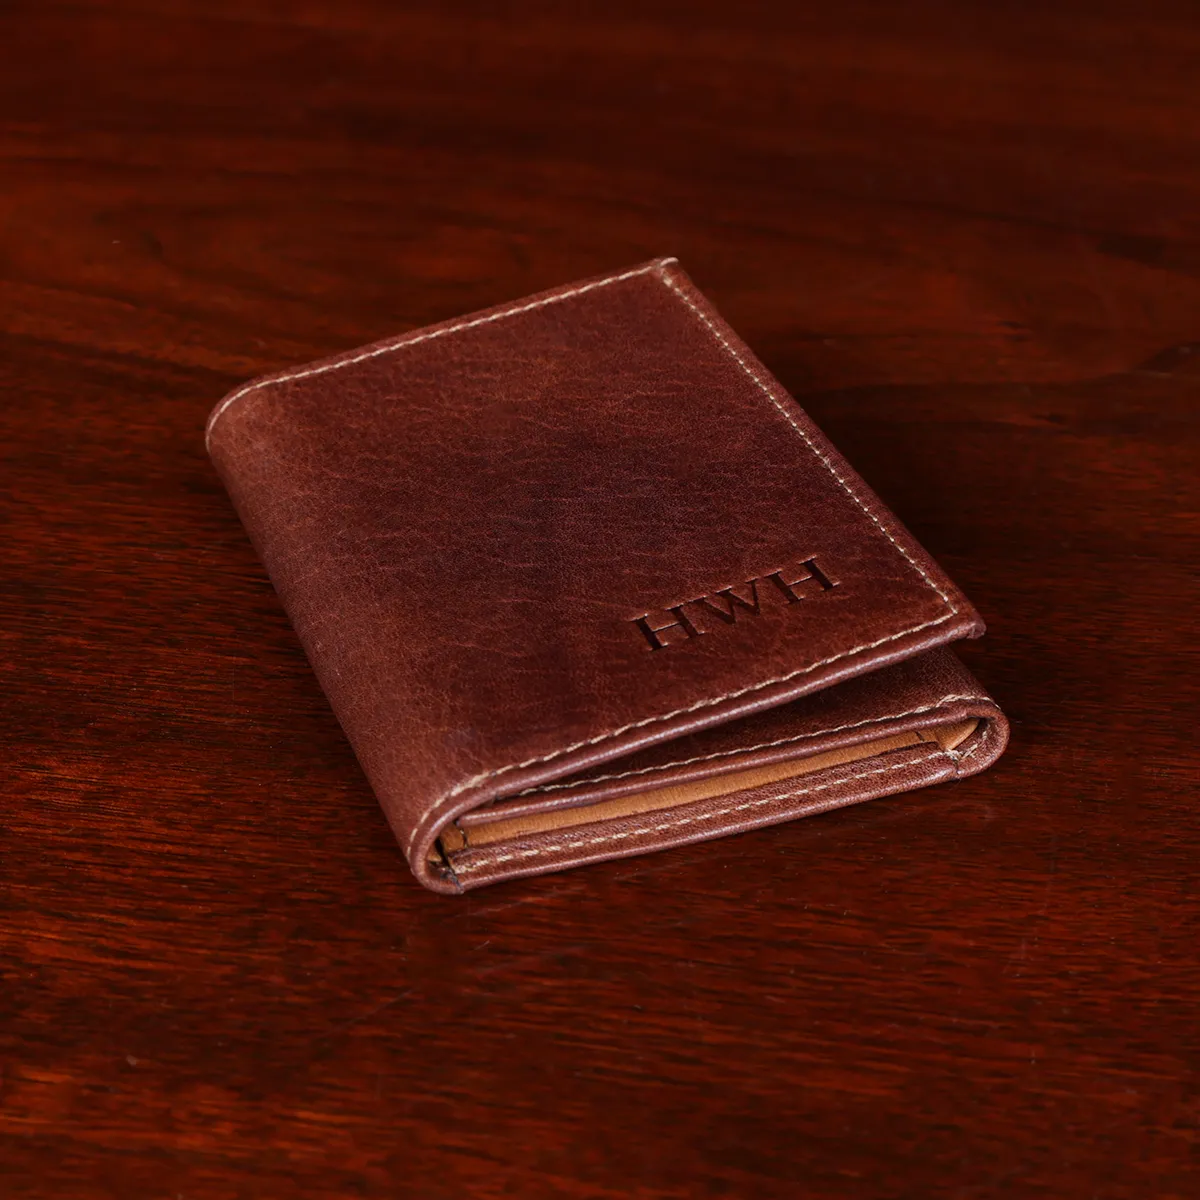 Rectangular Polished Leather Passport Wallets, Style : Antique